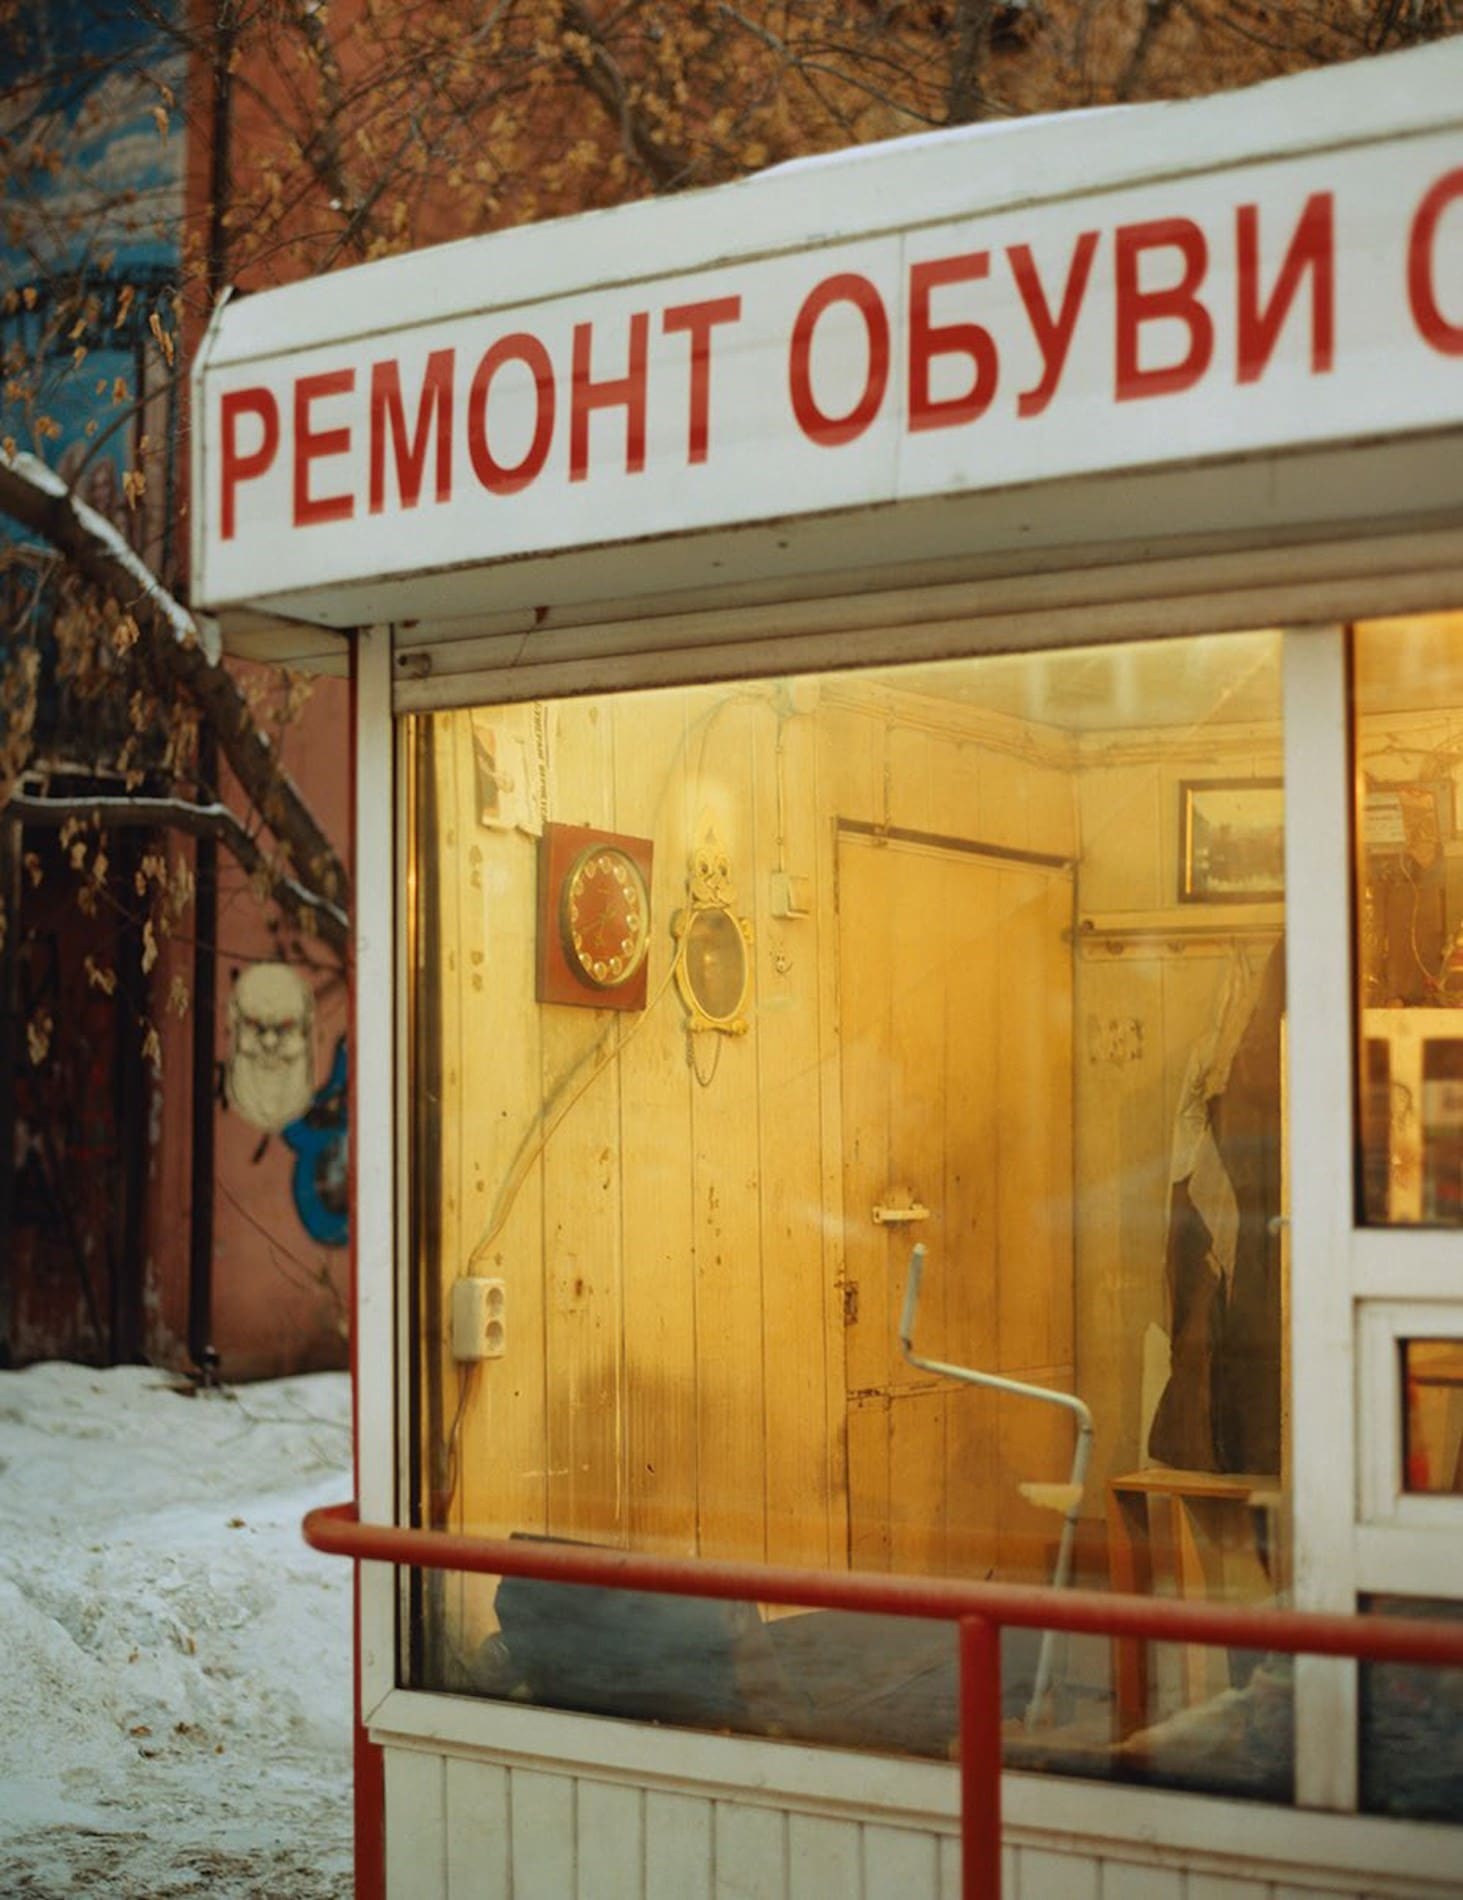 Coco Capitan | A view through a front window illuminated by yellow light into a shop or restaurant, with Cyrillic lettering above